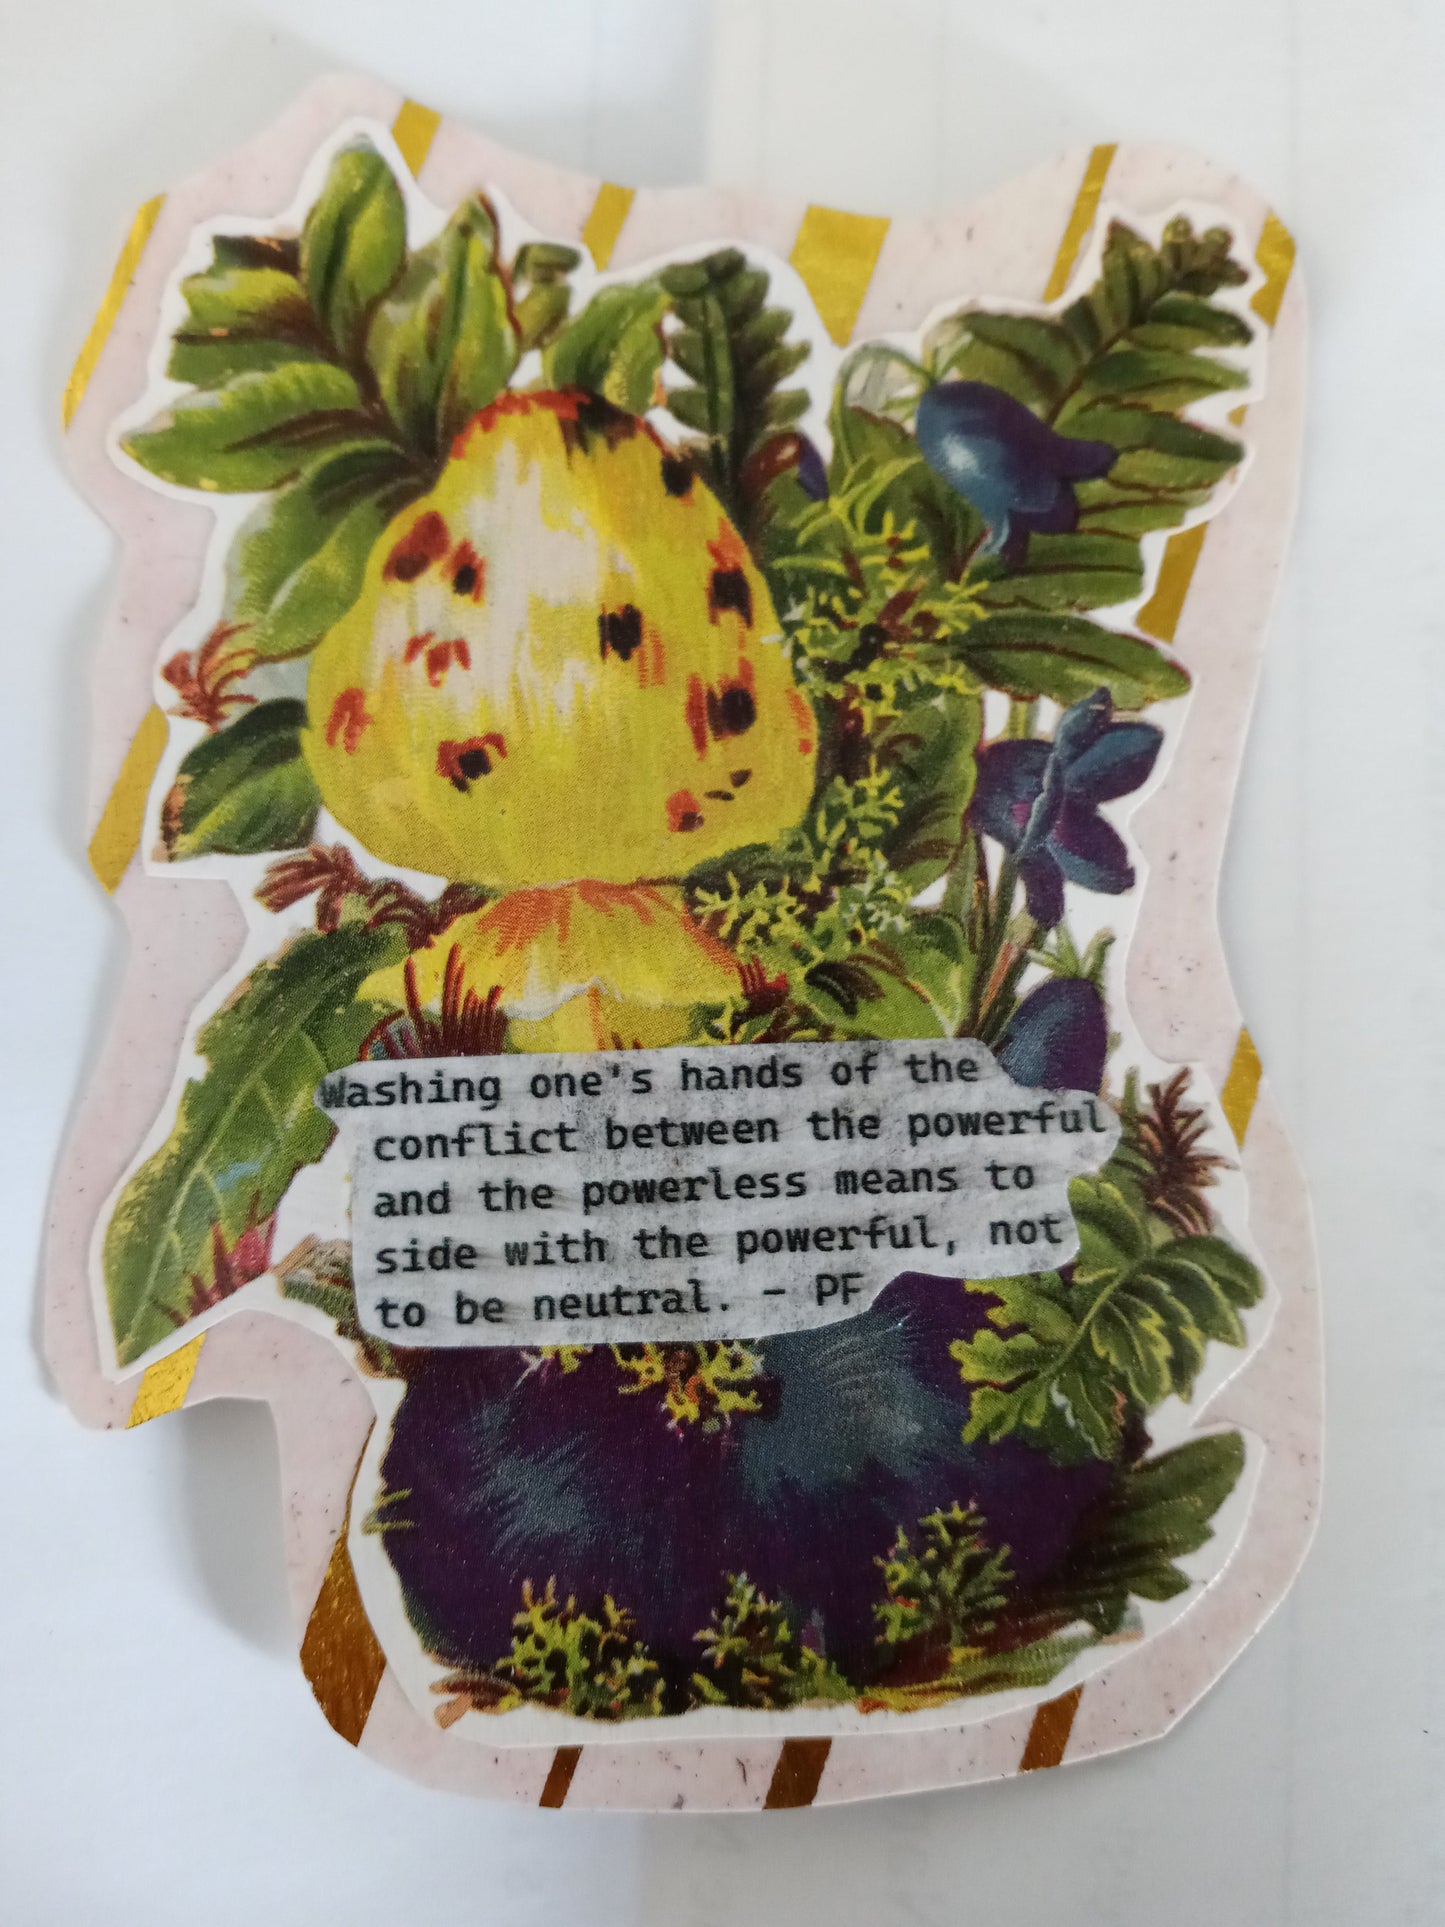 A handmade sticker of an irregular shape with a white and gold foil edging surrounding a Victorian style floral arrangement in blue yellow and green with a quote on white paper over top that reads "Washing one's hands of the conflict between the powerful and the powerless means to side with the powerful, not to be neutral. - PF"